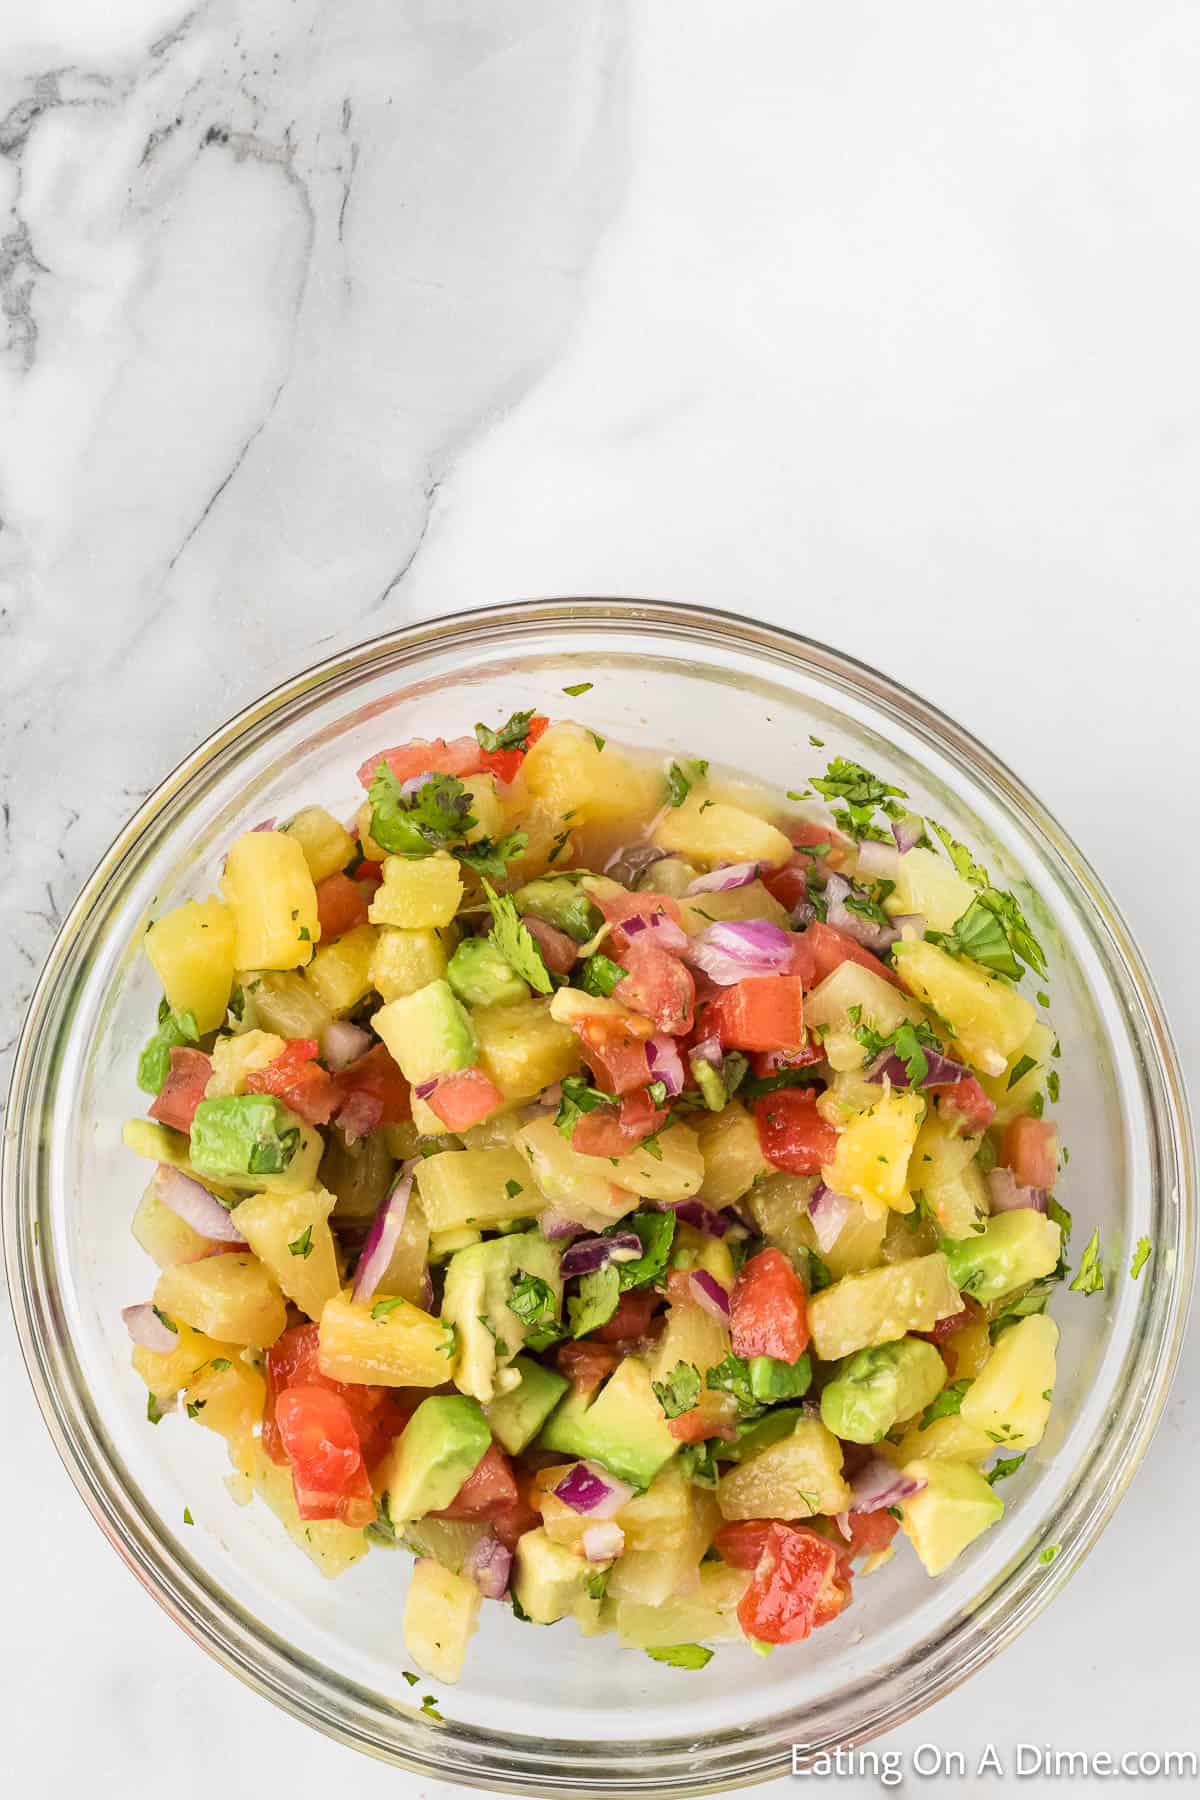 Combine salsa ingredients together in a bowl